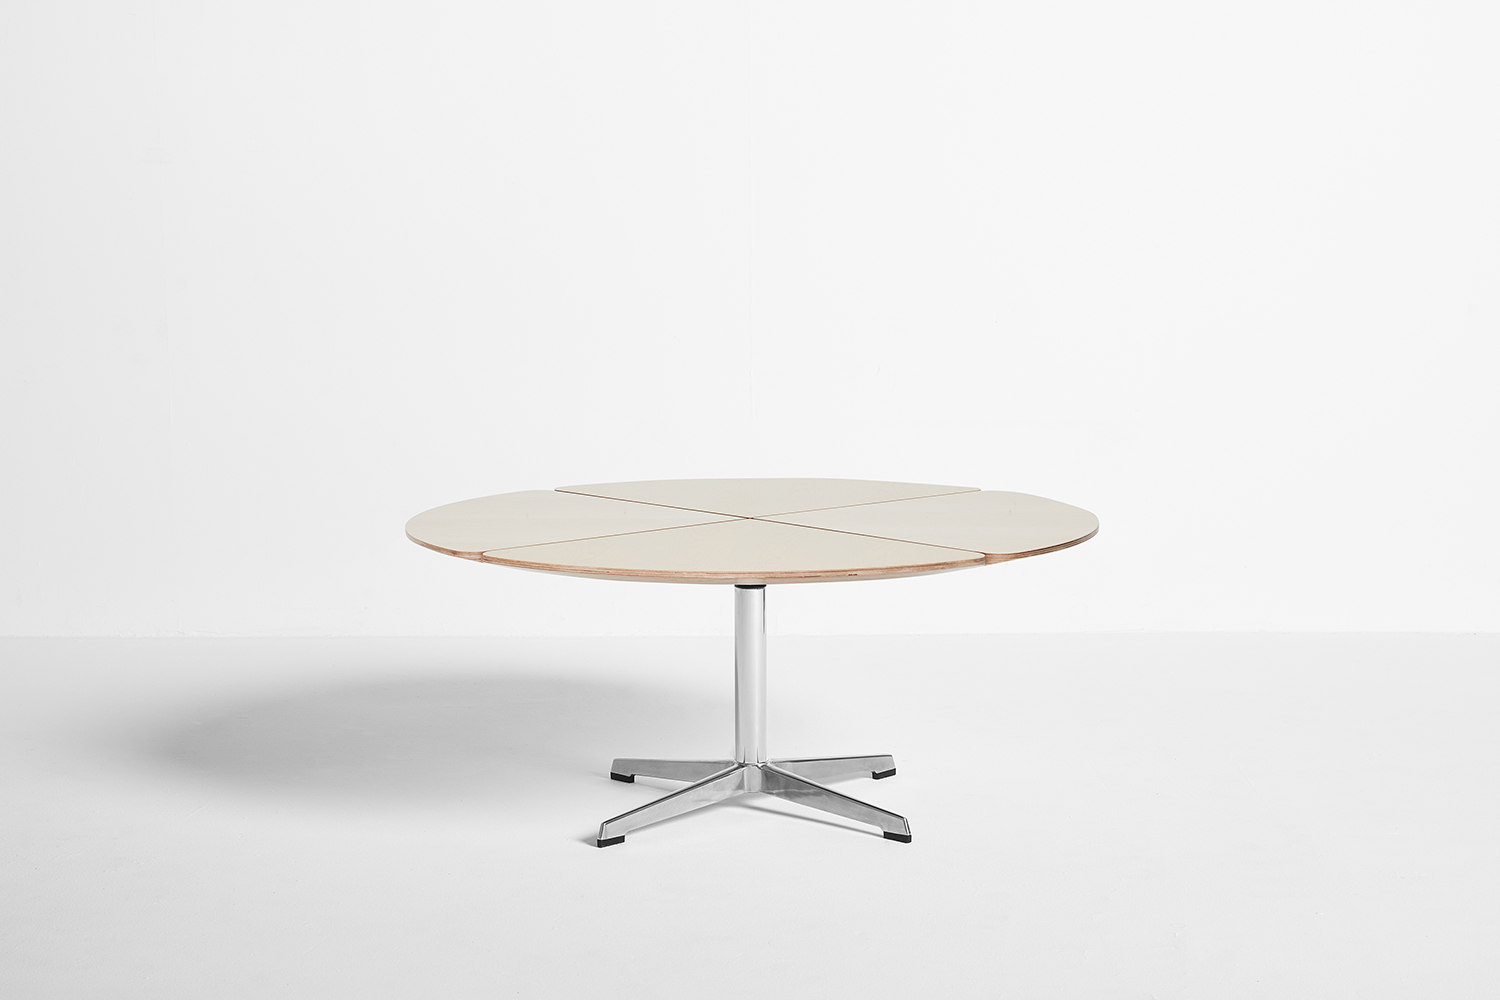 Expo 67 Table